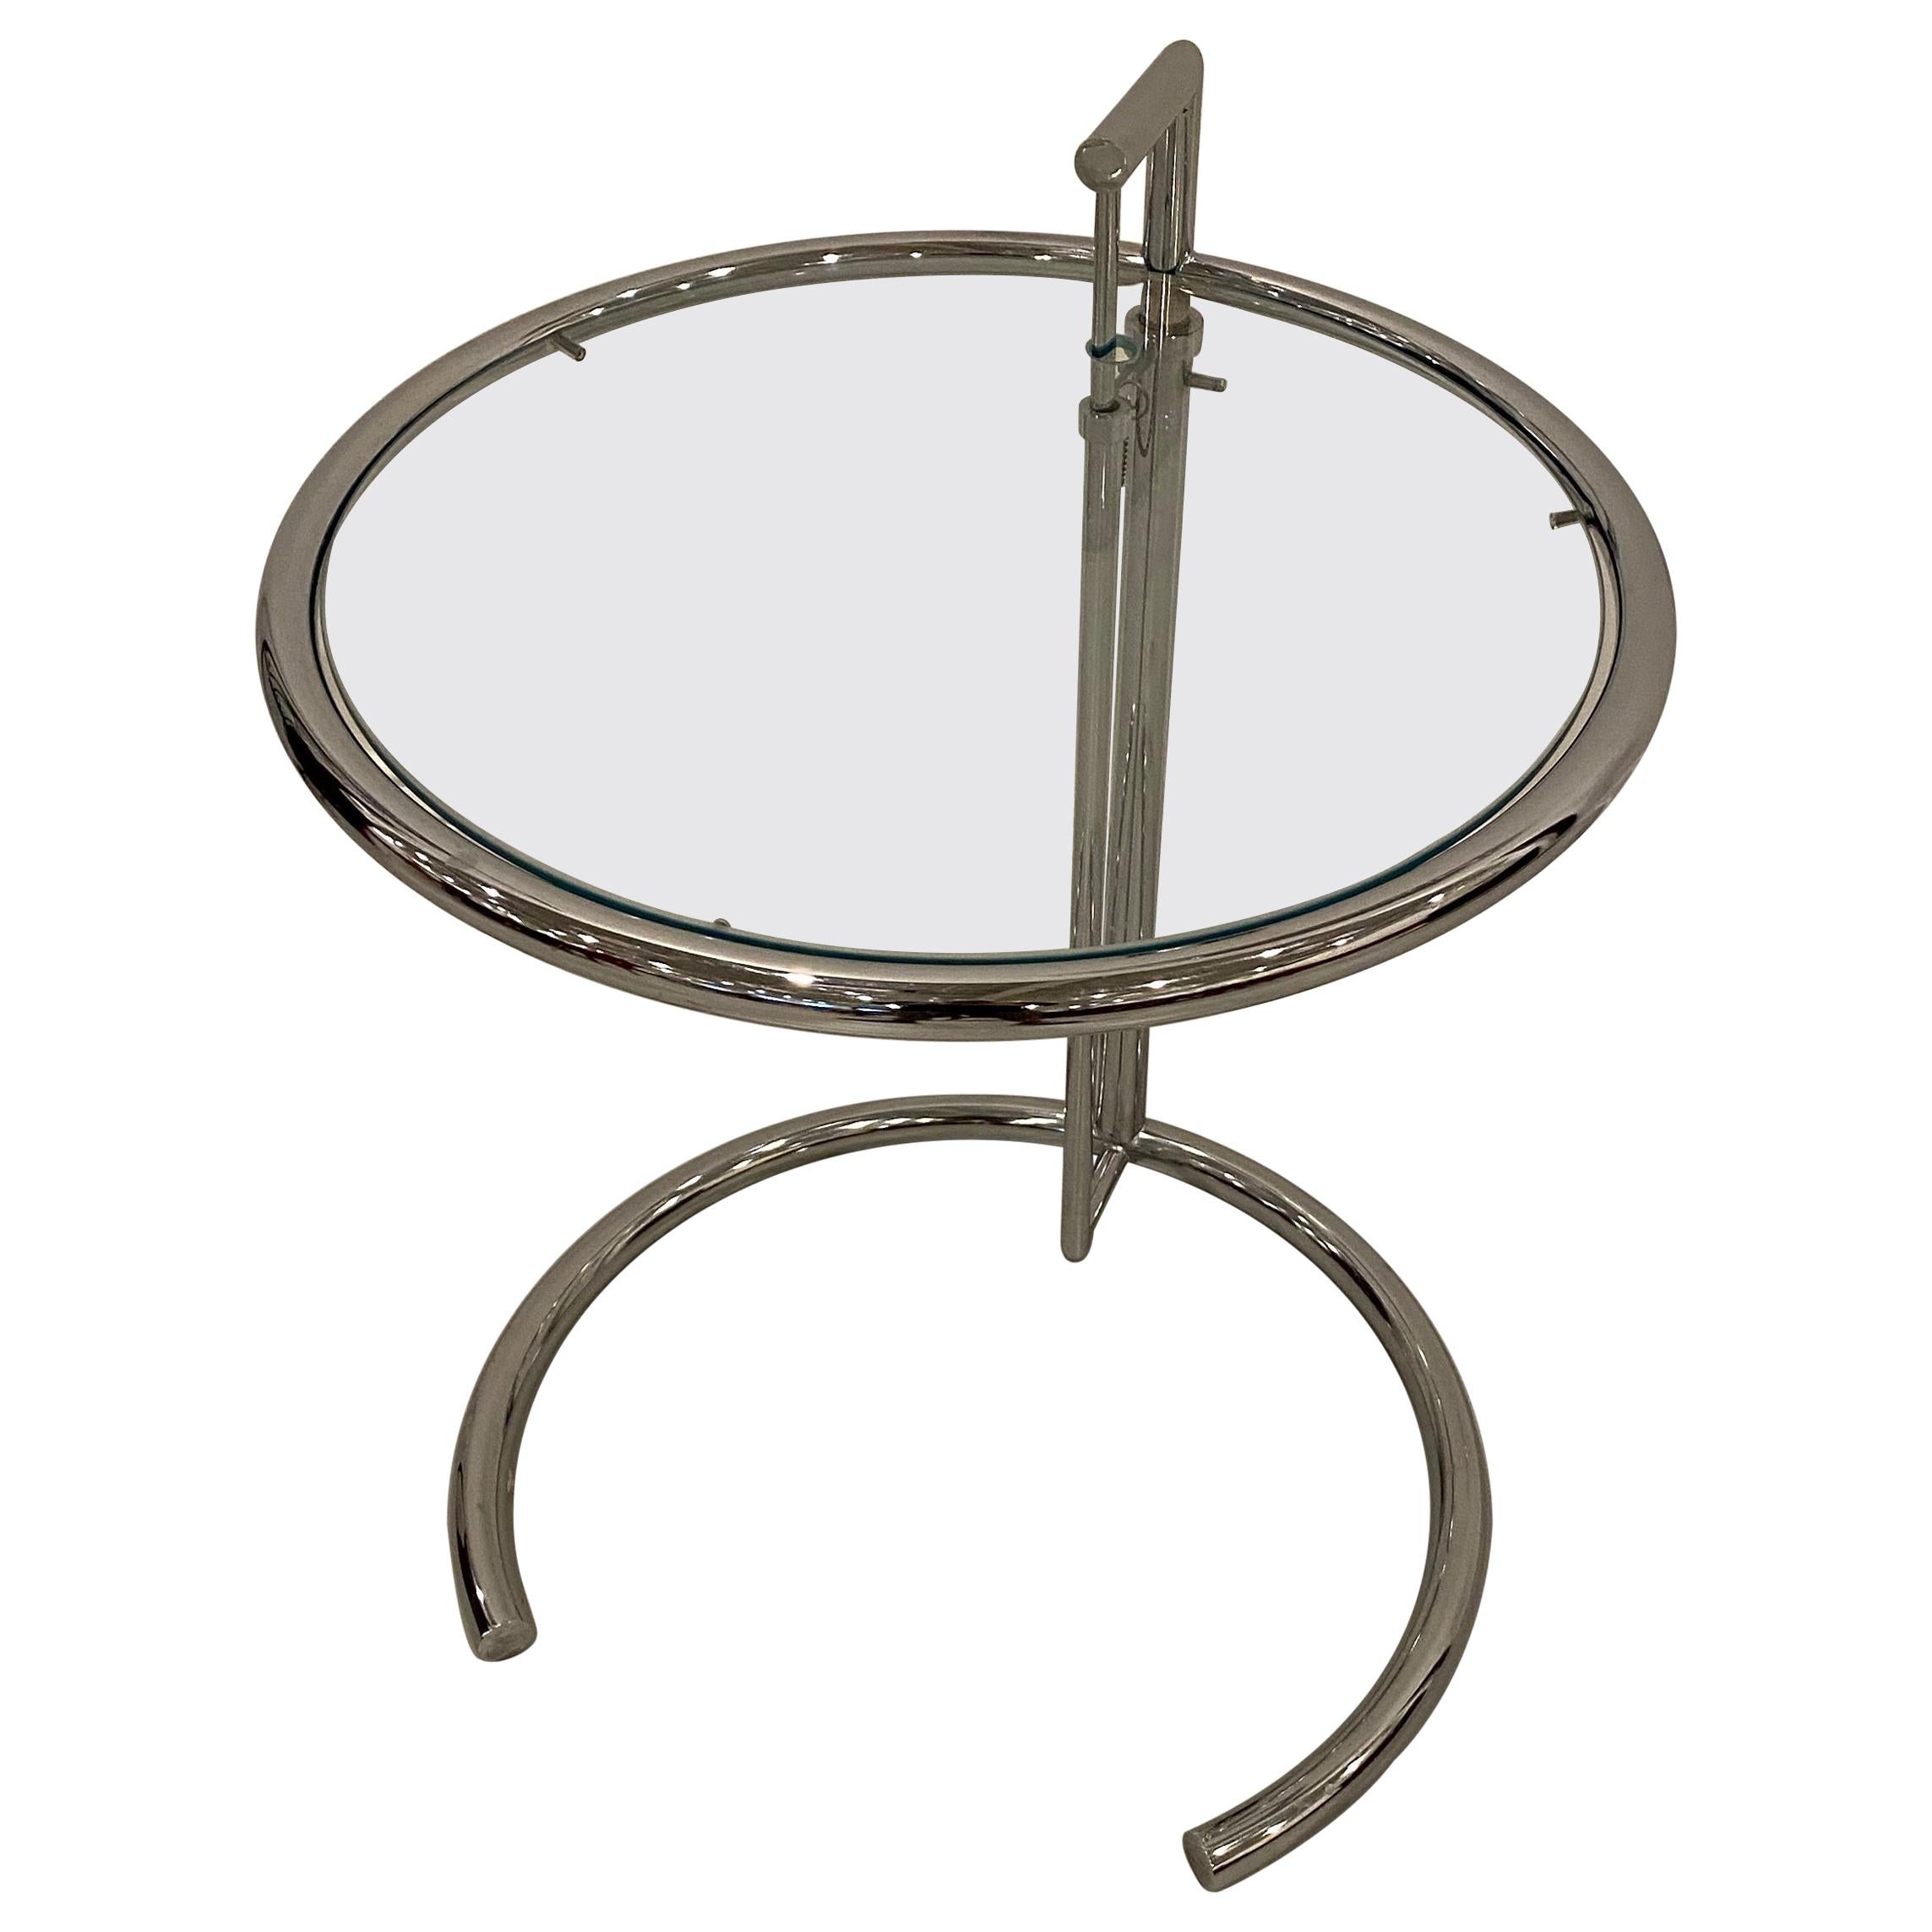 Mid-Century Modern Chrome and Glass Adjustable Table